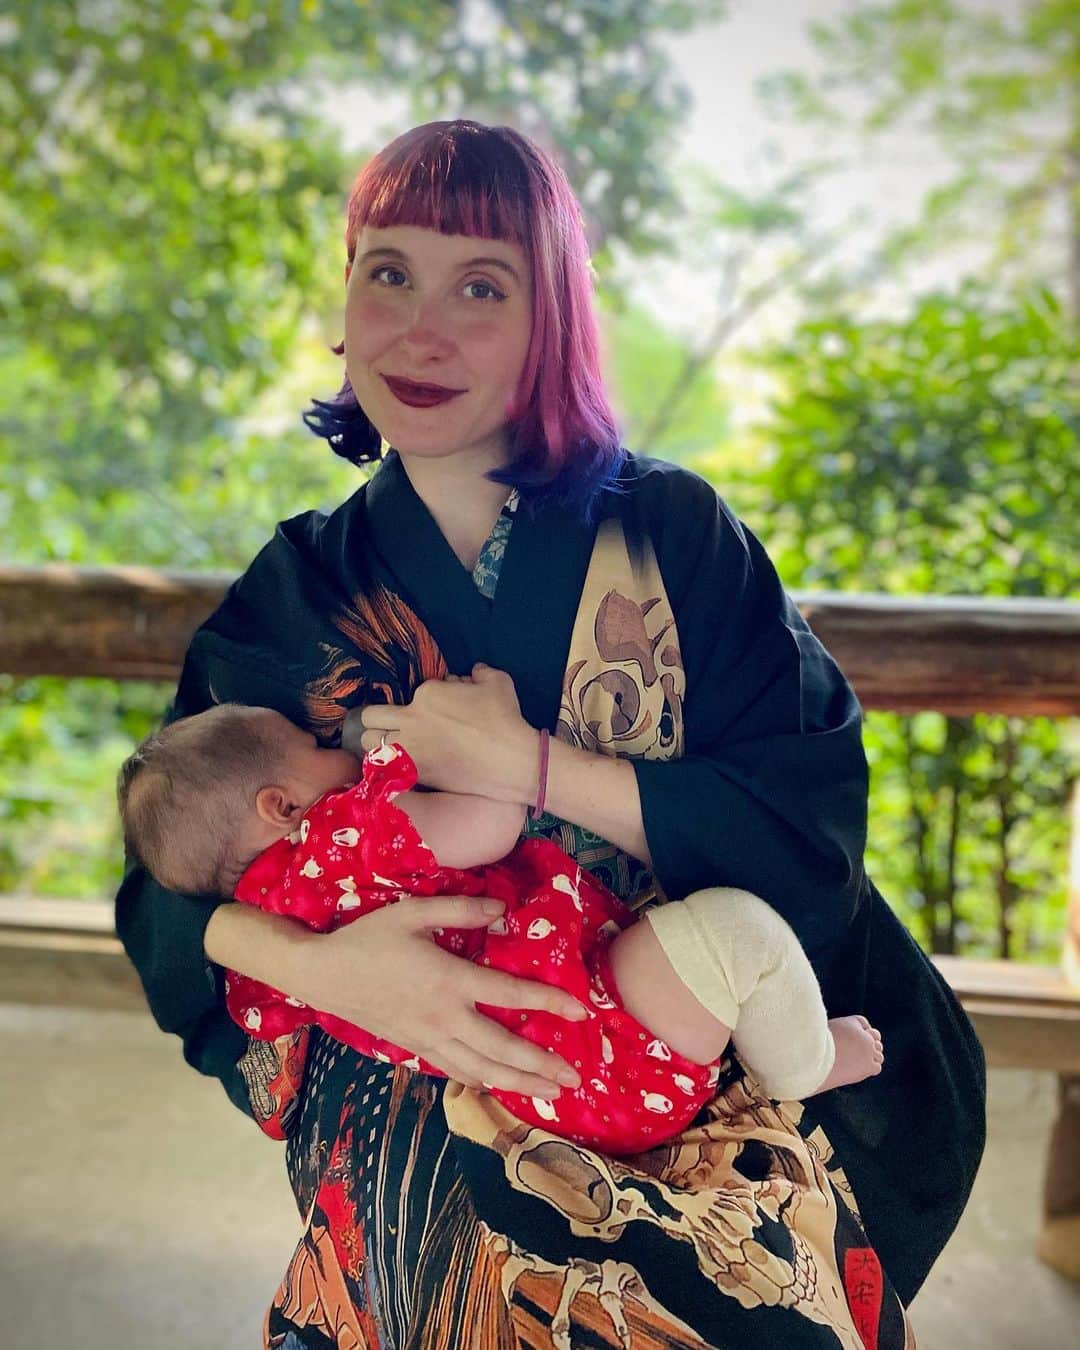 Anji SALZのインスタグラム：「Breastfeeding in kimono 🤱🏻 Out in the wild 🍃  Still love how discreet it is doing so from the “armpit hole” - it looks like you are just holding your child 😝  If curious - I made a How to video with my first child - it’s on my YouTube. Search for Anji SALZ.  授乳中🤱🏻 着物の身八つ口から授乳すると、子供を抱っこしてるだけにみえる。😌便利！  着物で授乳のやり方は一人目の子のとき、YouTube動画で説明したので、よかったら「Anji SALZ」で検索😊  #kimono #japanesekimono #breastfeeding #momlife #tokyofashion #kimonolove #着物 #着物生活 #普段着物 #授乳 #授乳コーデ #着物でお出かけ」